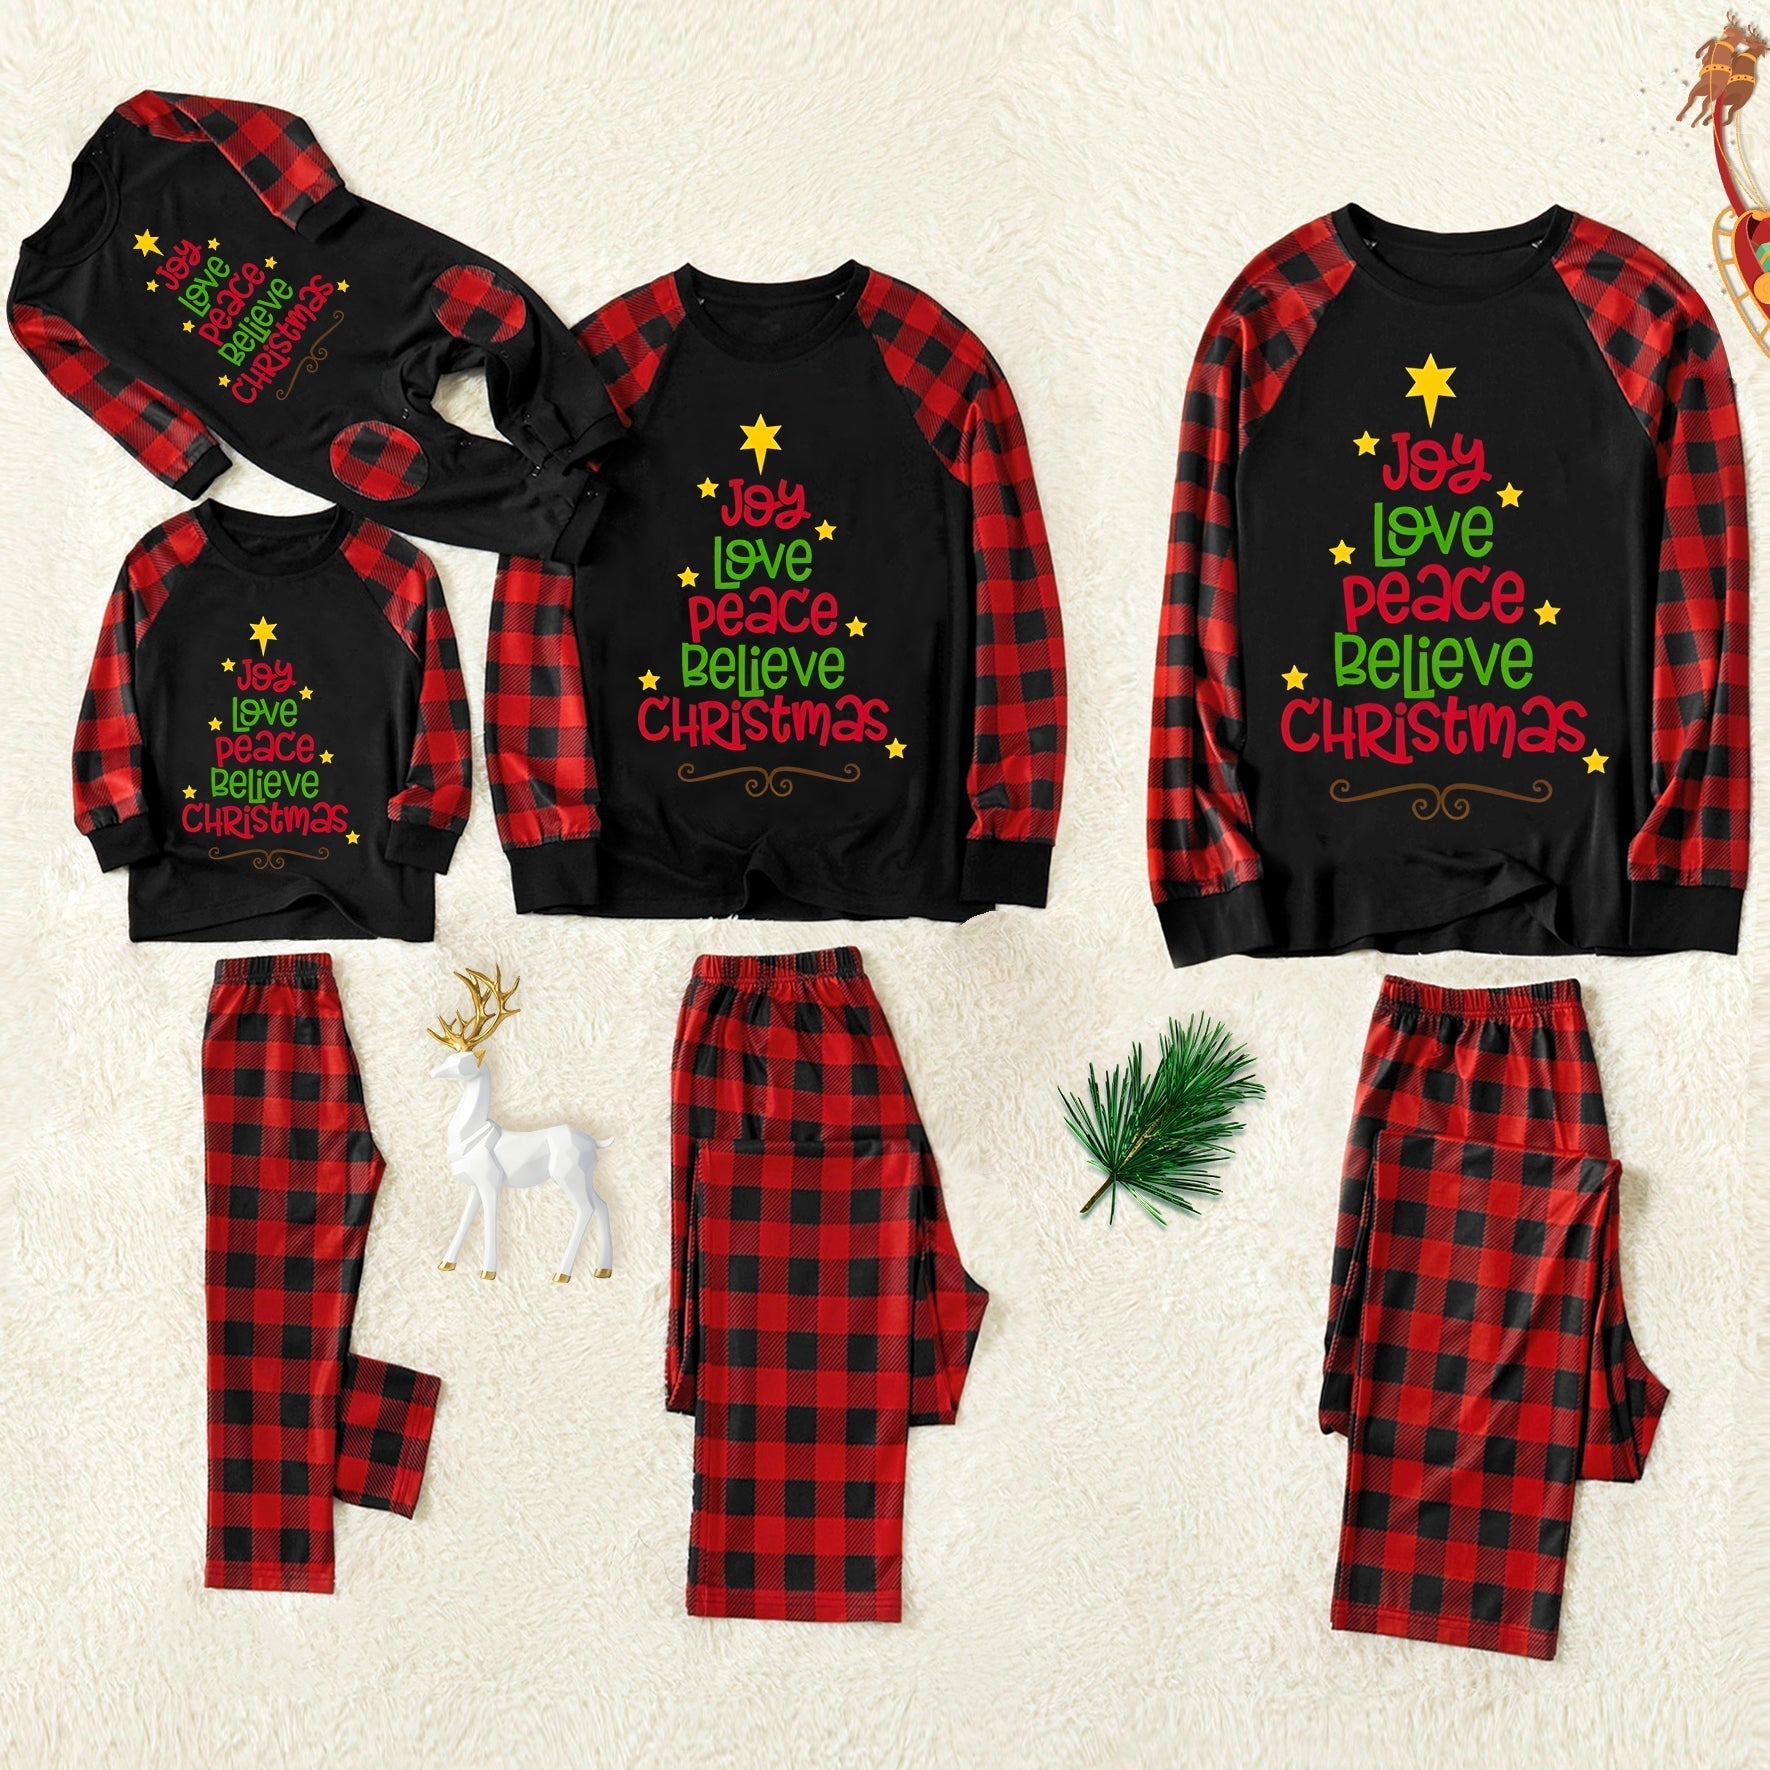 Christmas "Joy Love Peace Believe Christmas" Letter Print Patterned Contrast Black top and Black & Red Plaid Pants Family Matching Pajamas Set With Dog Bandana